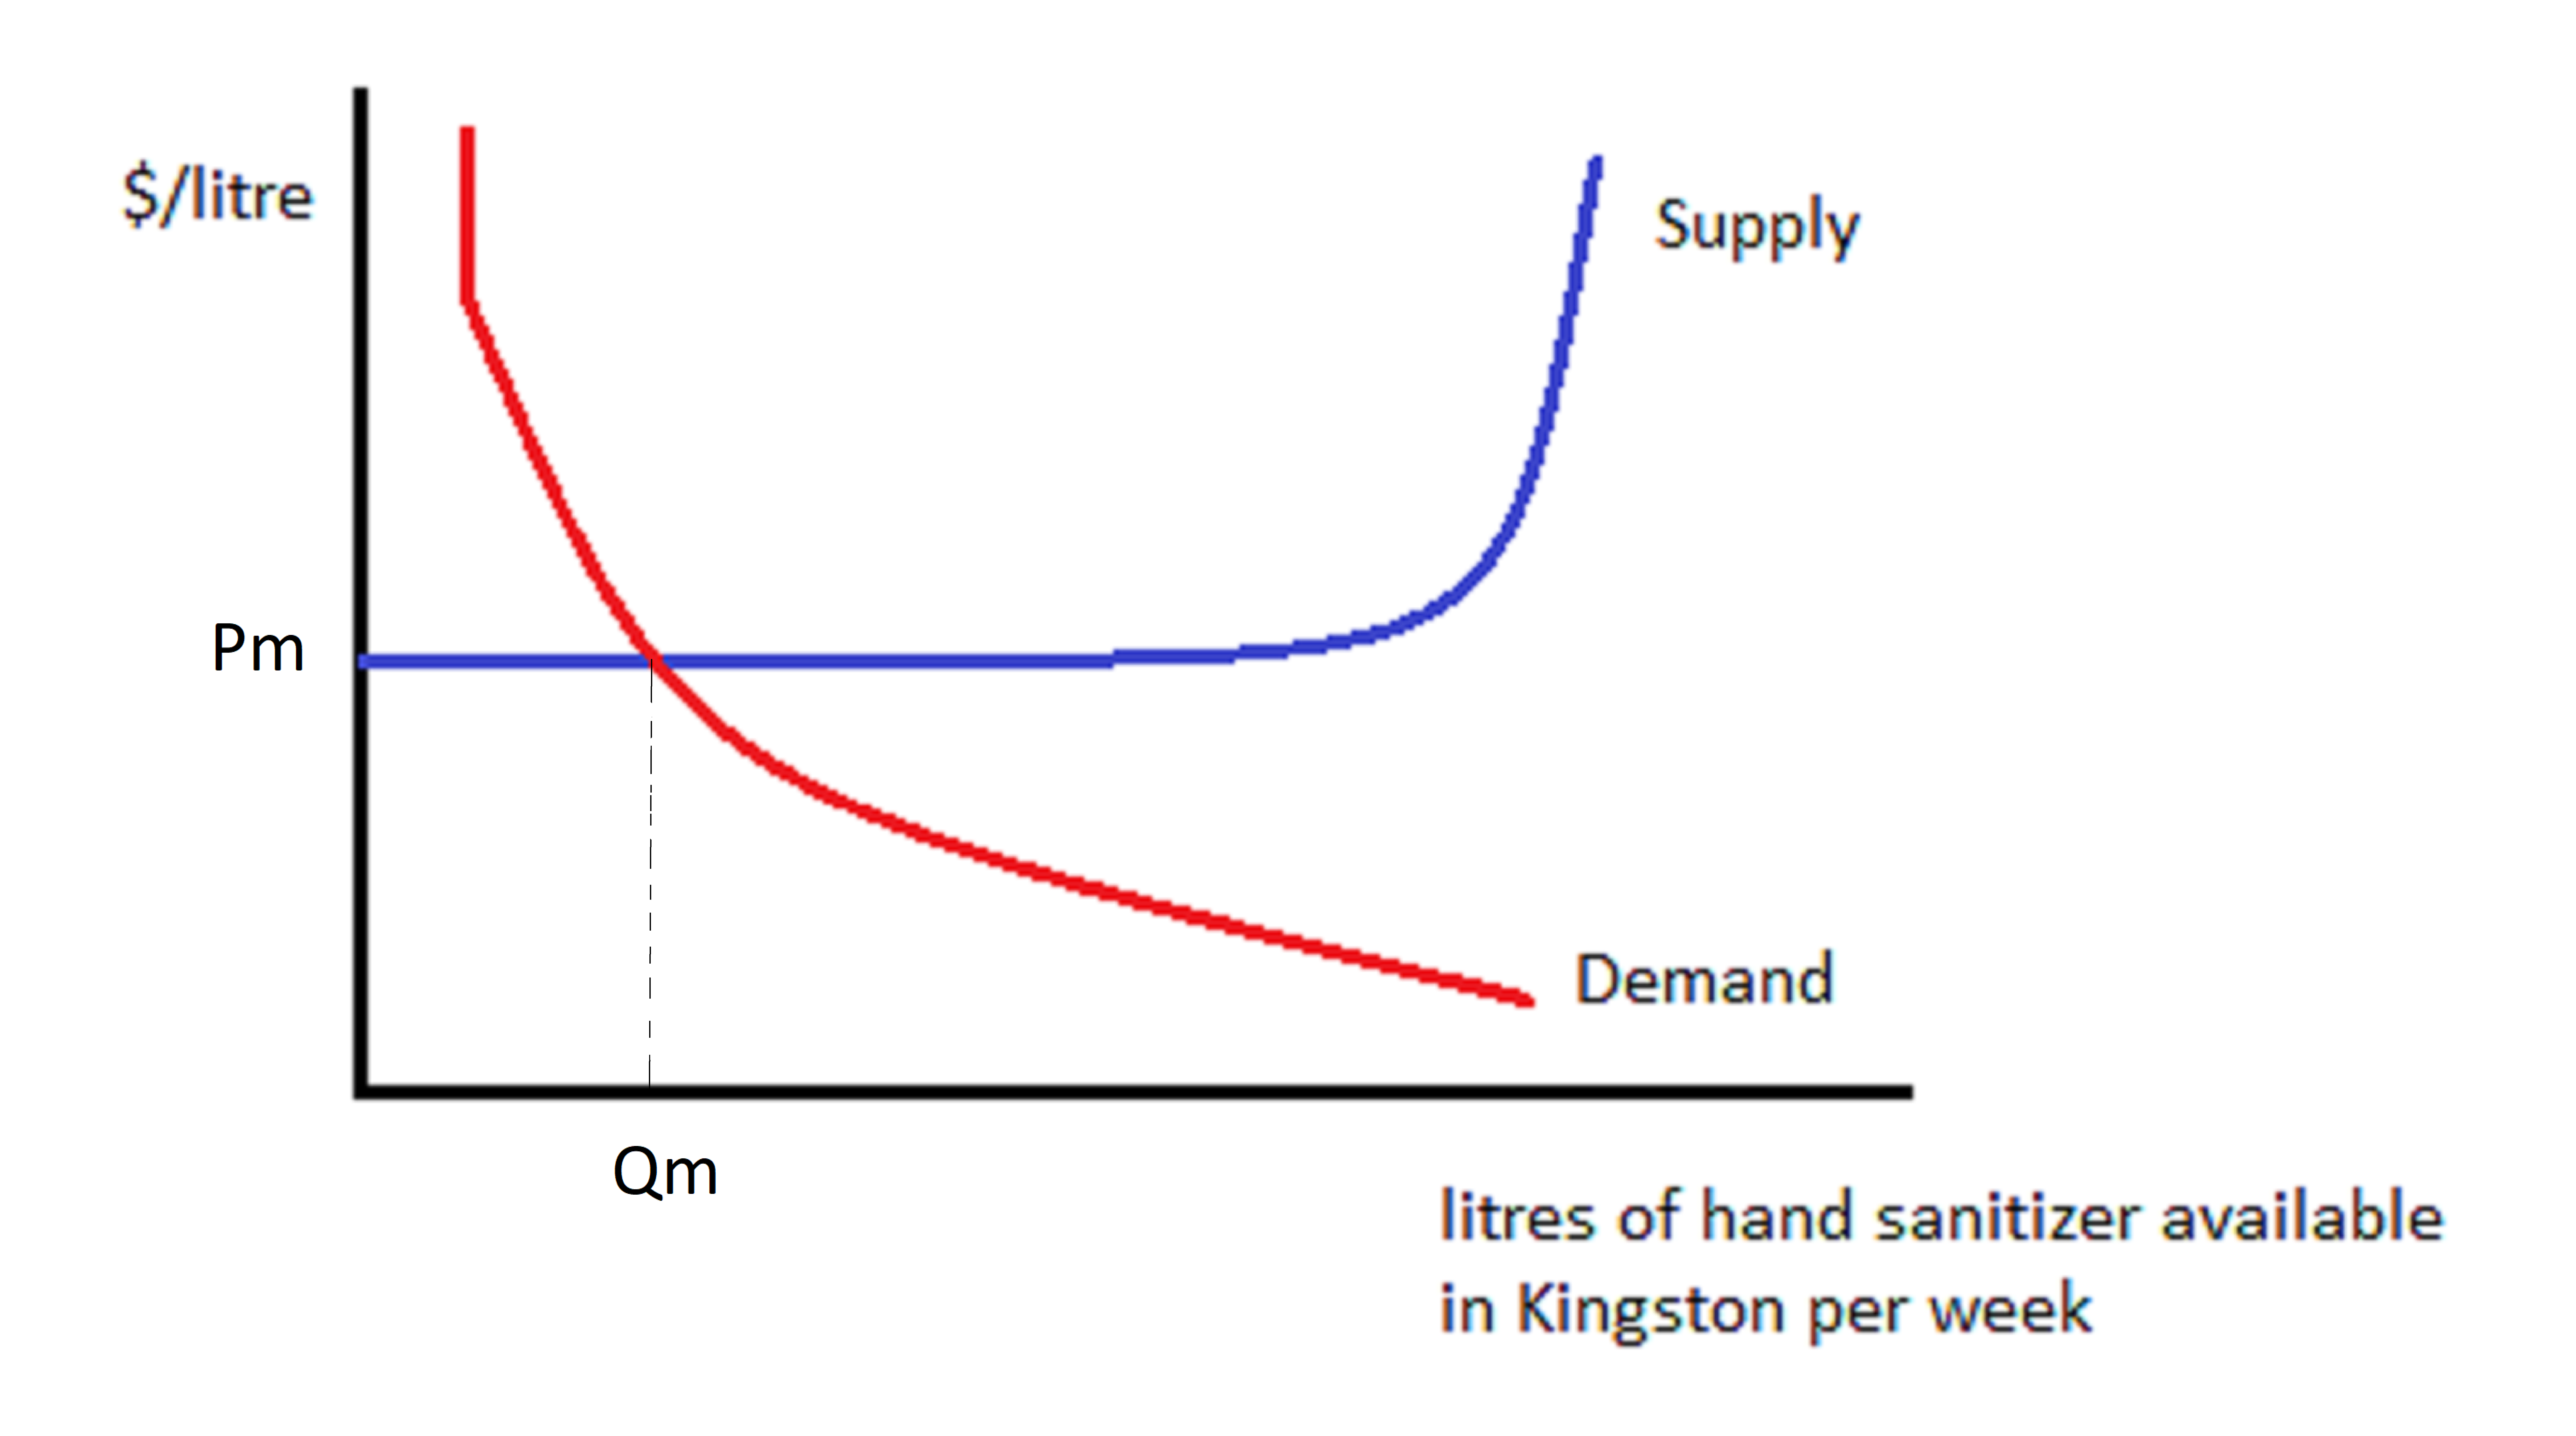 A demand curve intersects a supply curve where the supply curve is horizontal. The supply curve doesn't slope up until much larger quantities are being traded in Kingston each week. The price at this horizontal portion is Pm.